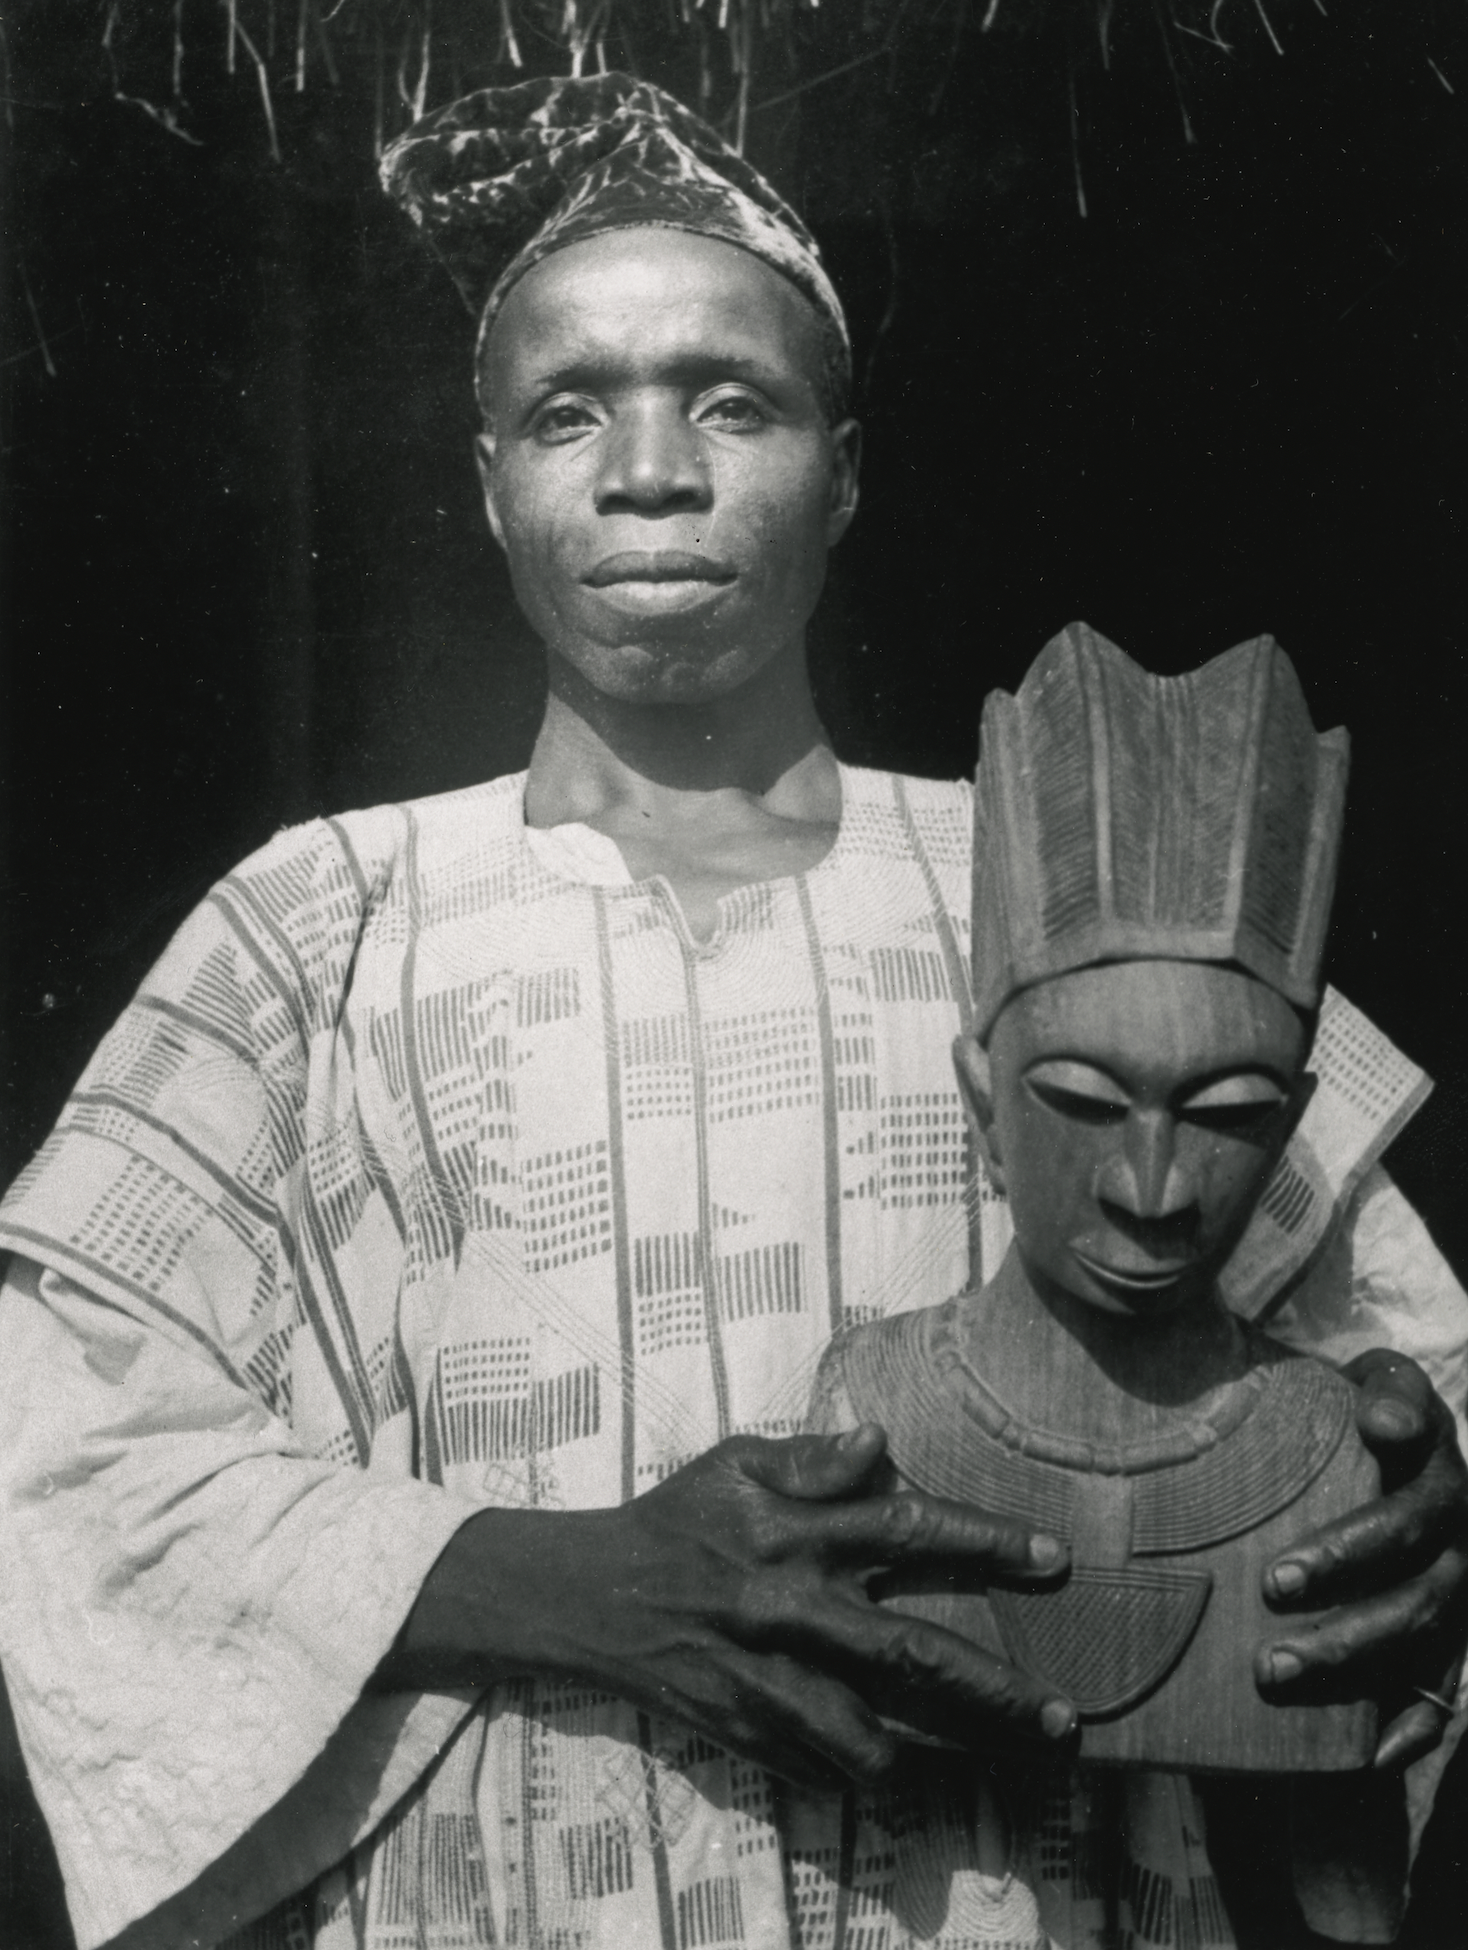  E. H. Duckworth, ‘Moshood Olusomo Bamigboye Holding a Portrait Bust.’ Ilofa, Kwara State, Nigeria, circa 1940. Danford Collection of West African Art and Artefacts, University of Birmingham, United Kingdom, inv. no. birrc-d432-1. © Research and Cultural Collections, University of Birmingham